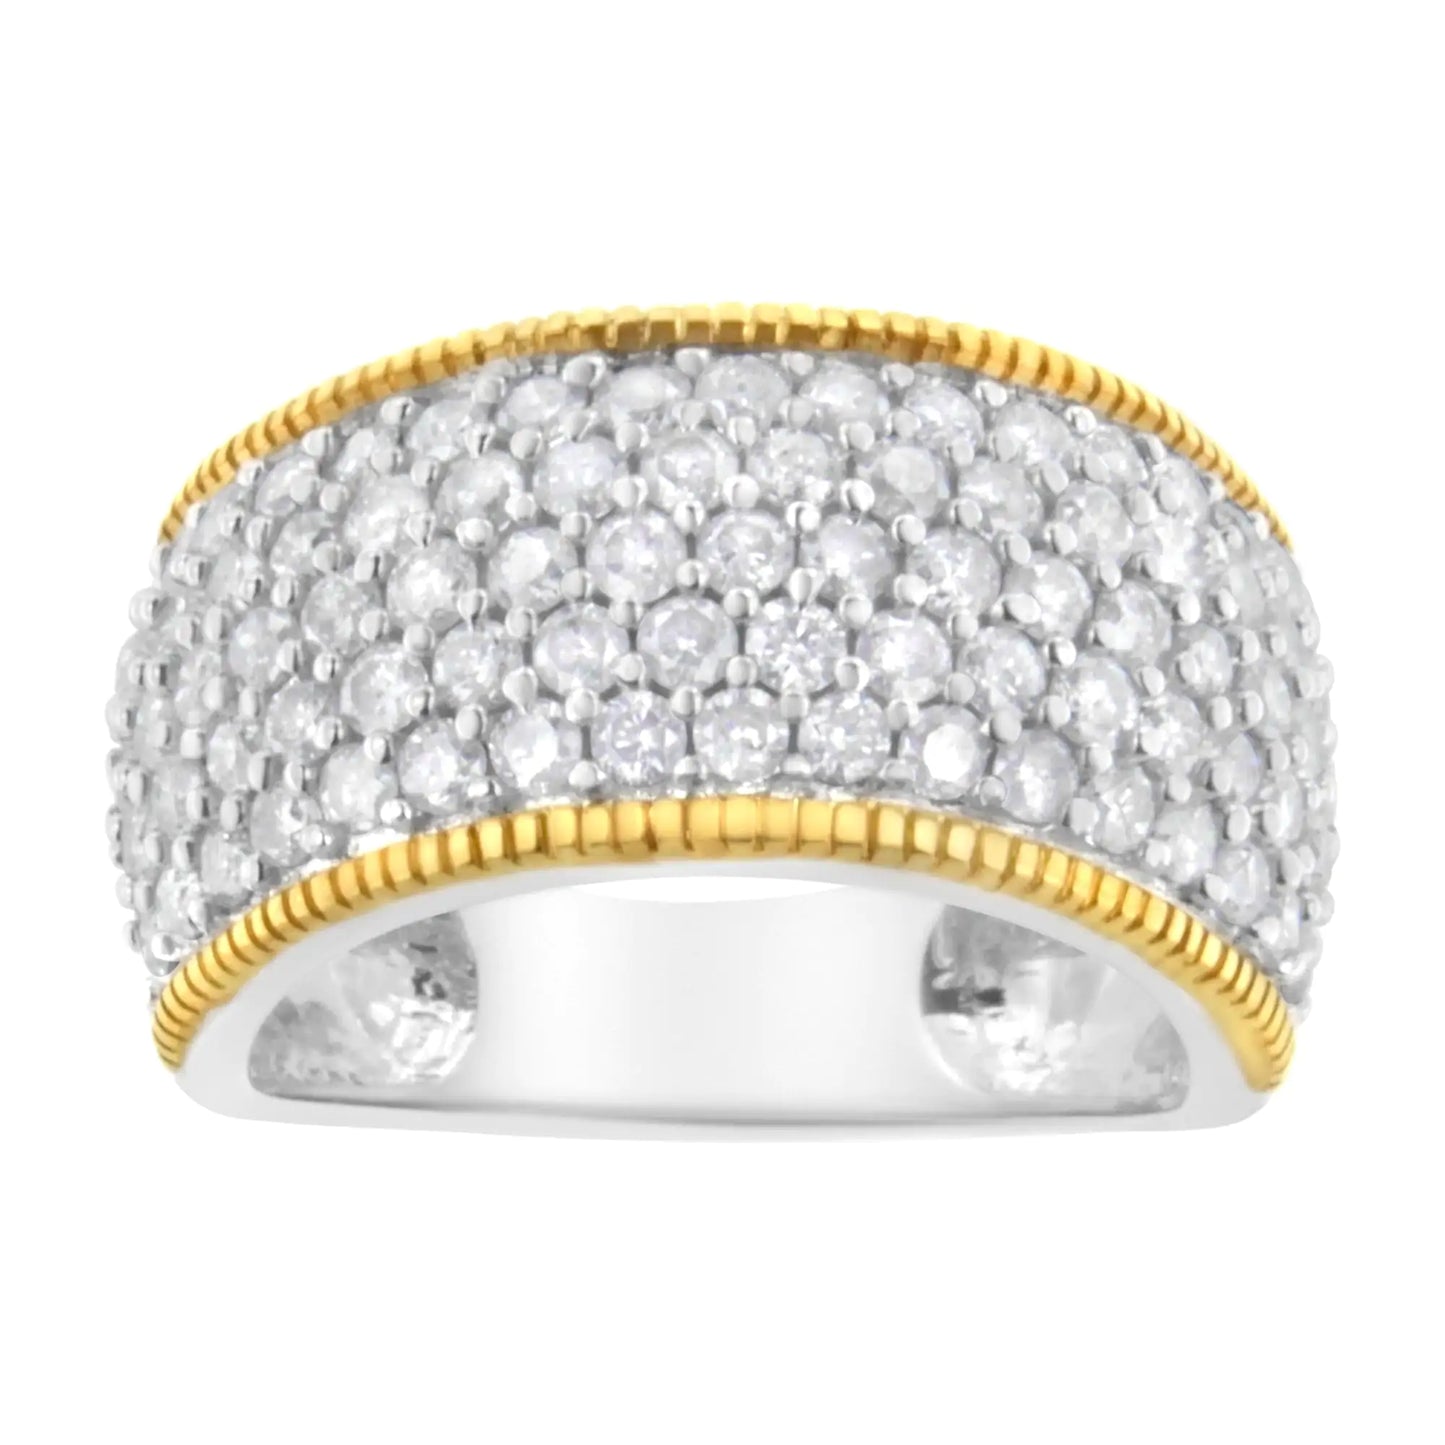 10K Yellow Gold Plated .925 Sterling Silver 2.0 Cttw Prong Set Round Cut Diamond 5 Row Anniversary Band Ring (I-J Color, I2-I3 Clarity)